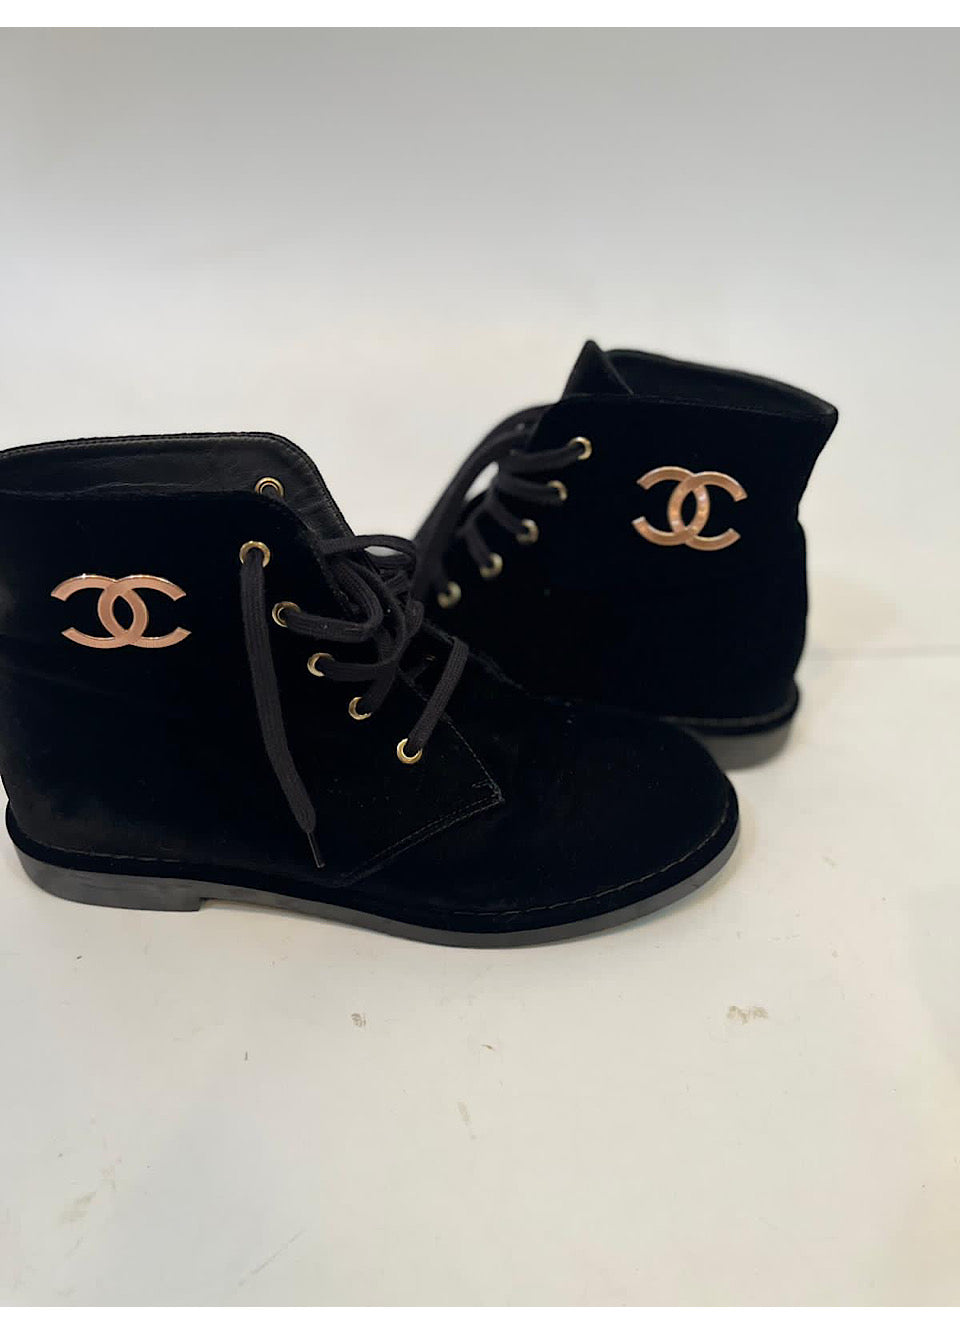 Chanel Black Suede And Leather Combat Lace Up Boots Size 38 Chanel